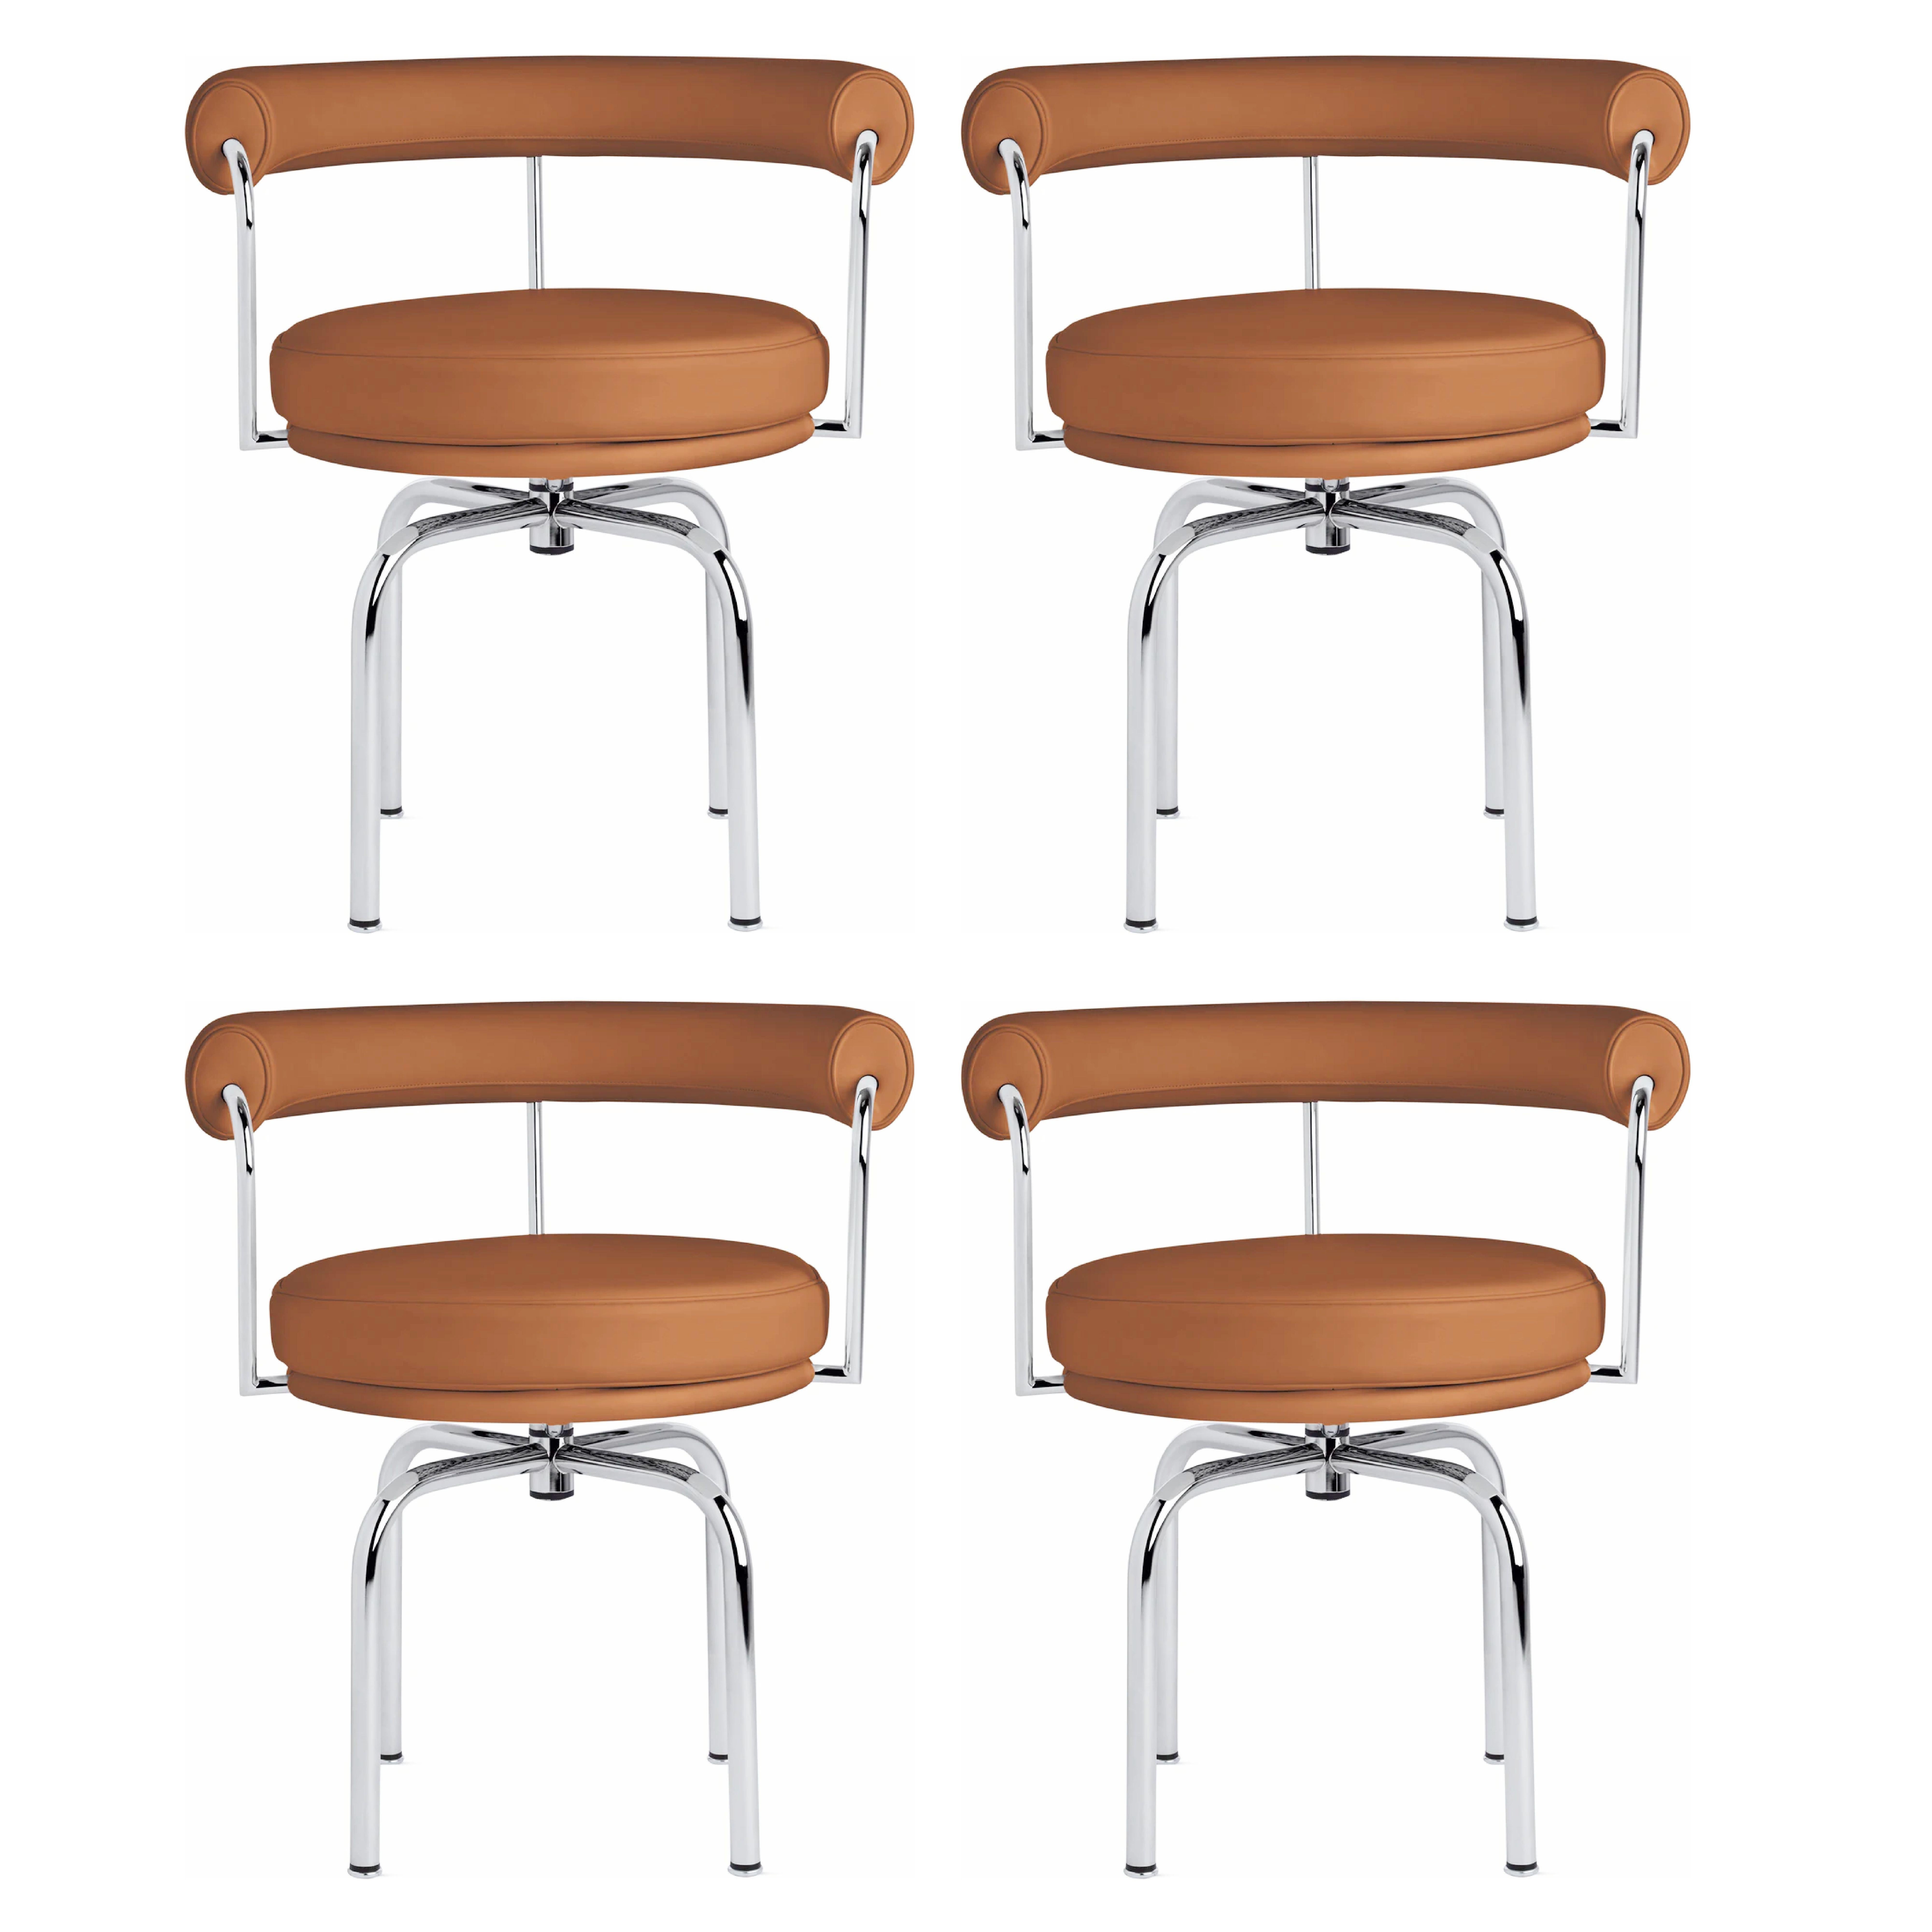 Charlotte Perriand, Le Corbusier LC7 Siège Tournant, Fauteuil, Set of 4 Chairs